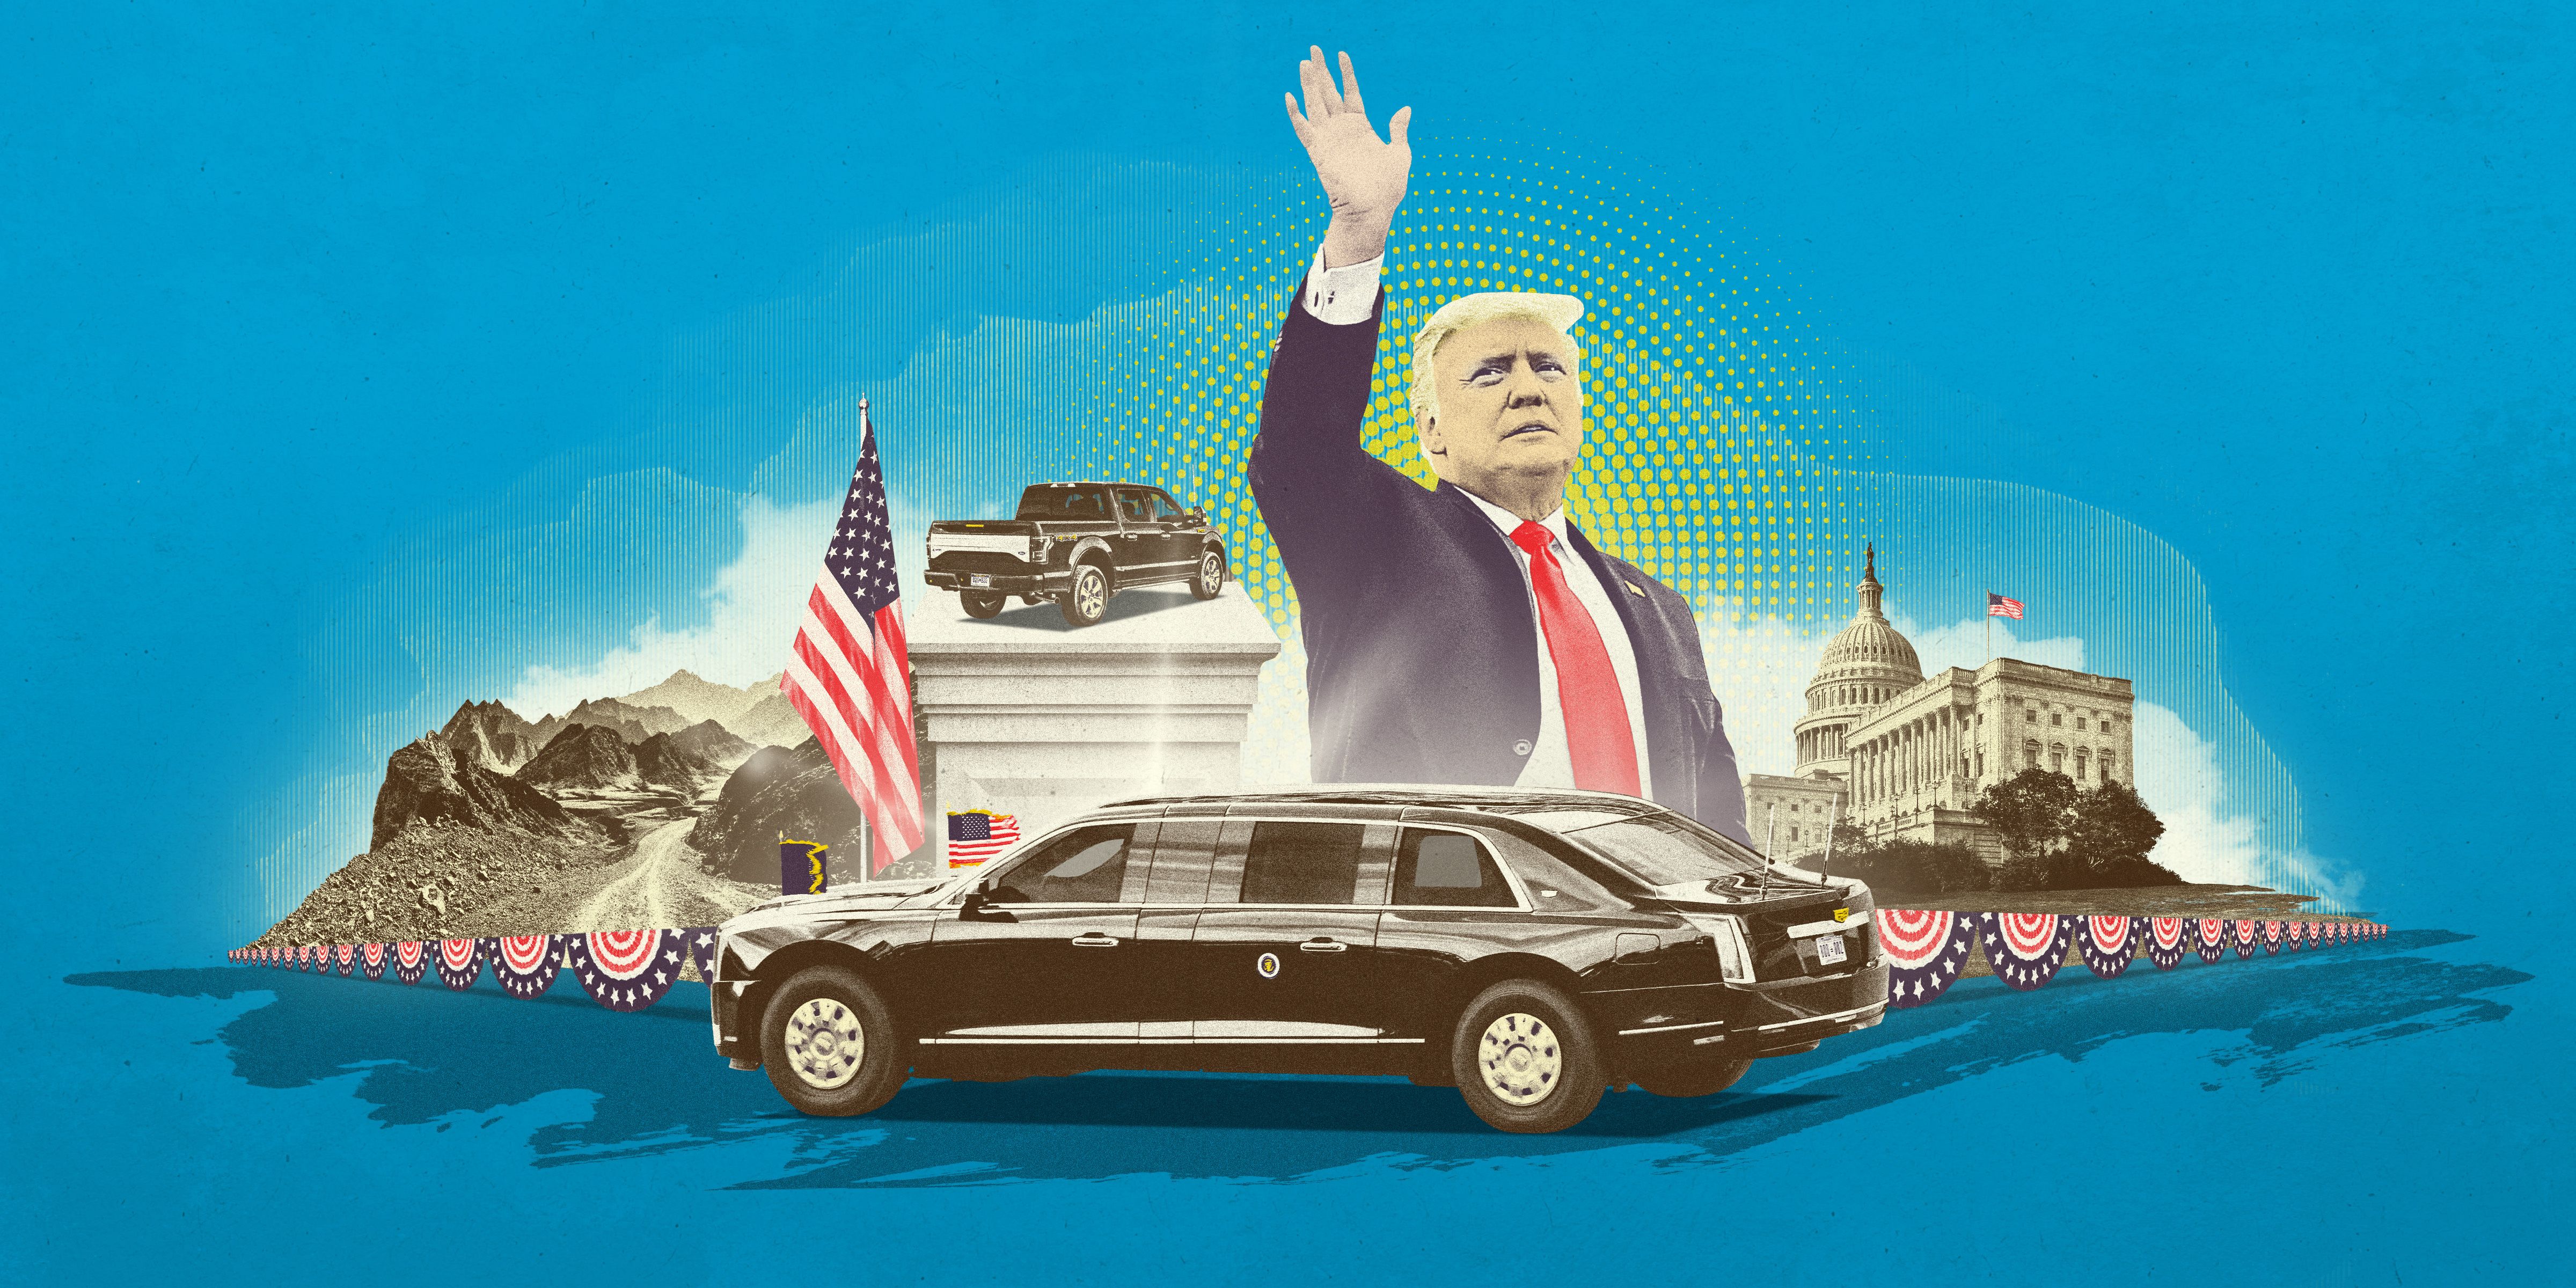 Presidential Limos of the World vs picture